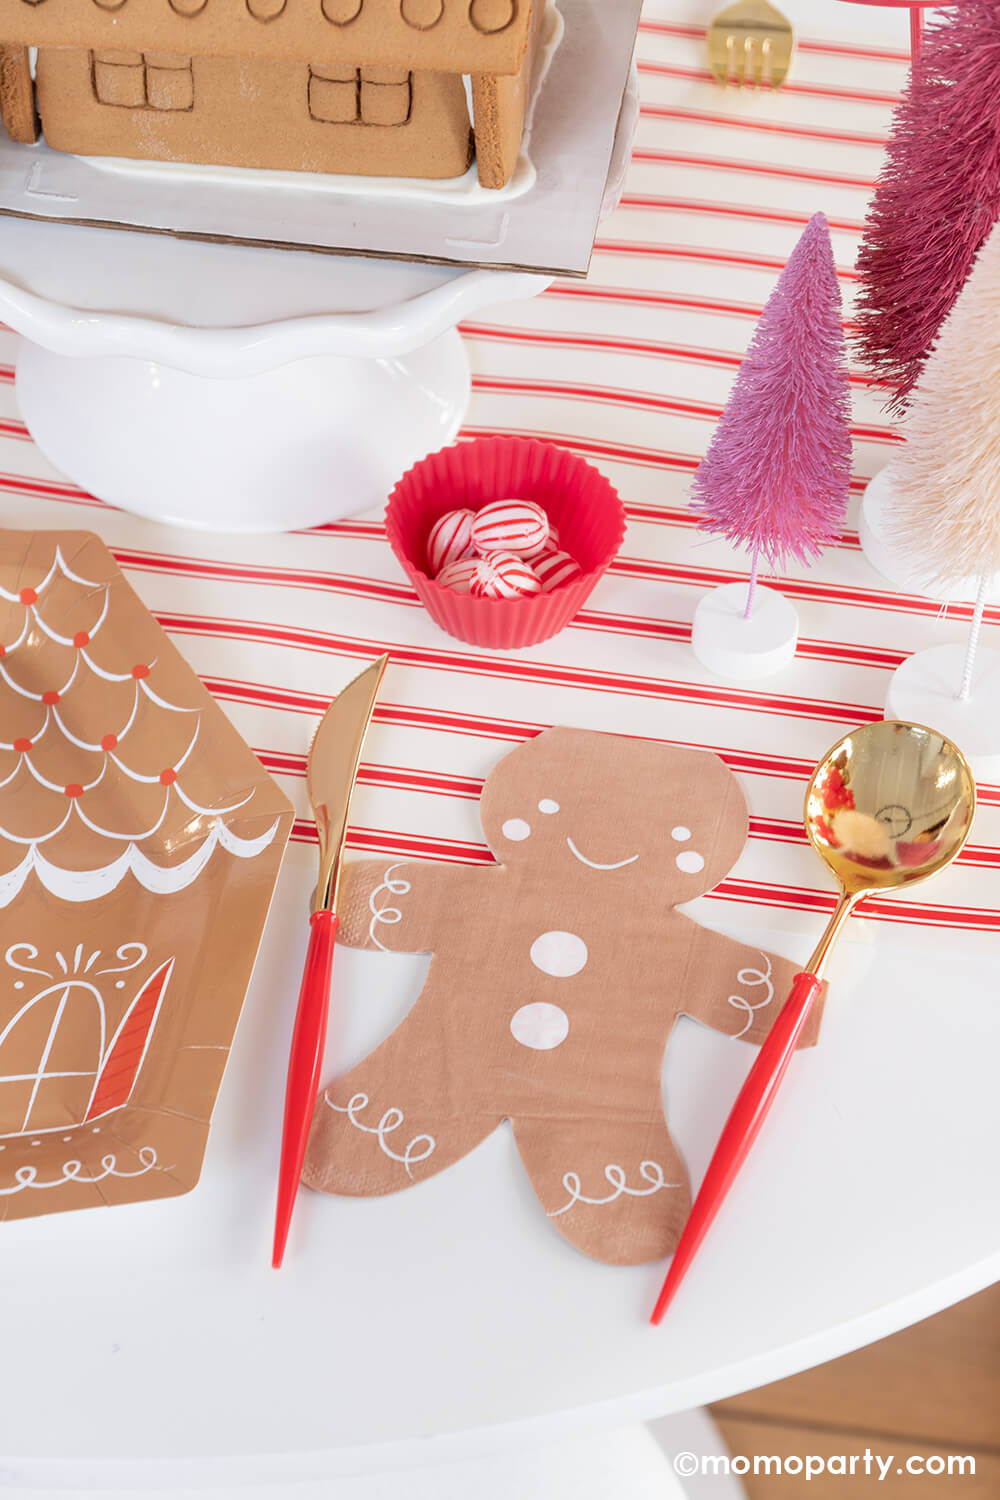 A corner of a festive holiday party table with Momo Party's smiley gingerbread man shaped napkin and festive red and gold cutlery placed on the sides on his hands next to a gingerbread house shaped plate which makes a playful tablescape. Around it is some pink bottle wash Christmas tress in different shades and some peppermint candies ready for decorating the gingerbread house for a kid's holiday fun activity. 